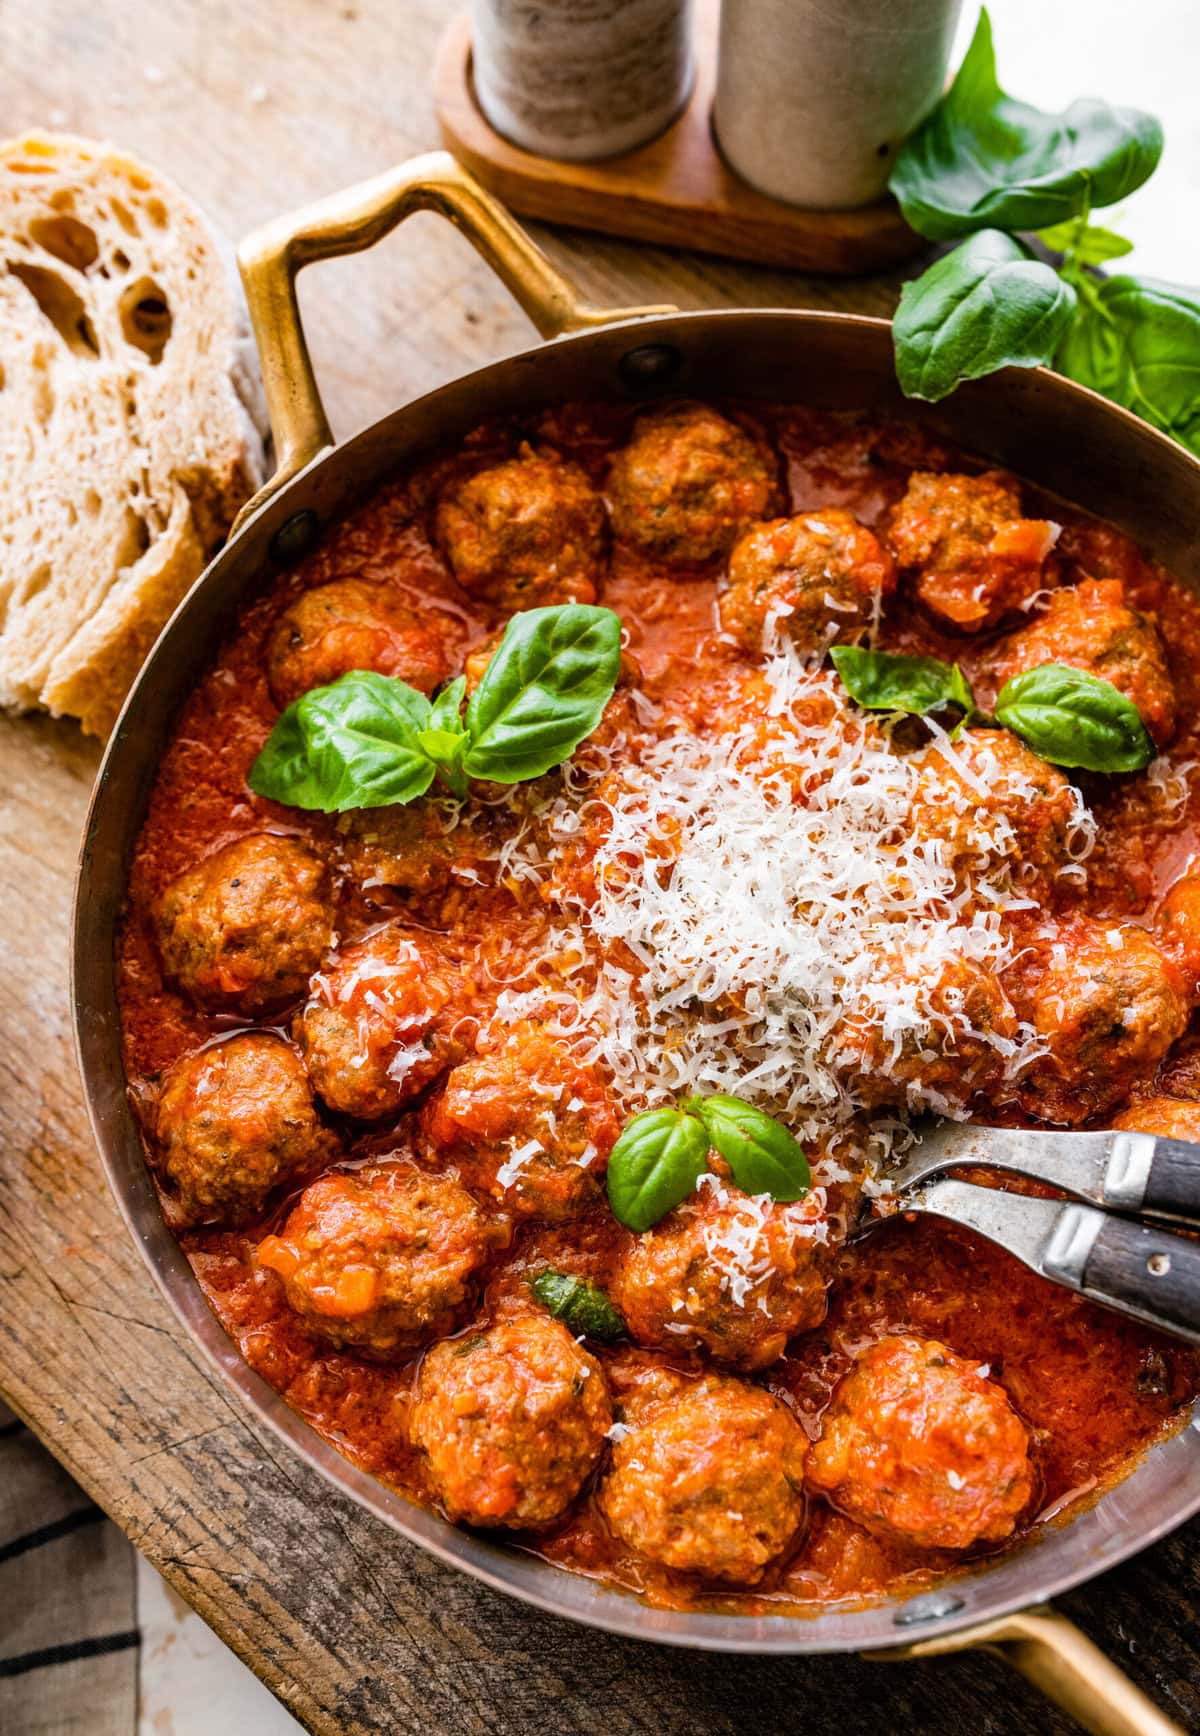 cooked meatballs in a round serving platter with serving utensils and basil on the side. Close up of the meatballs in the sauce.